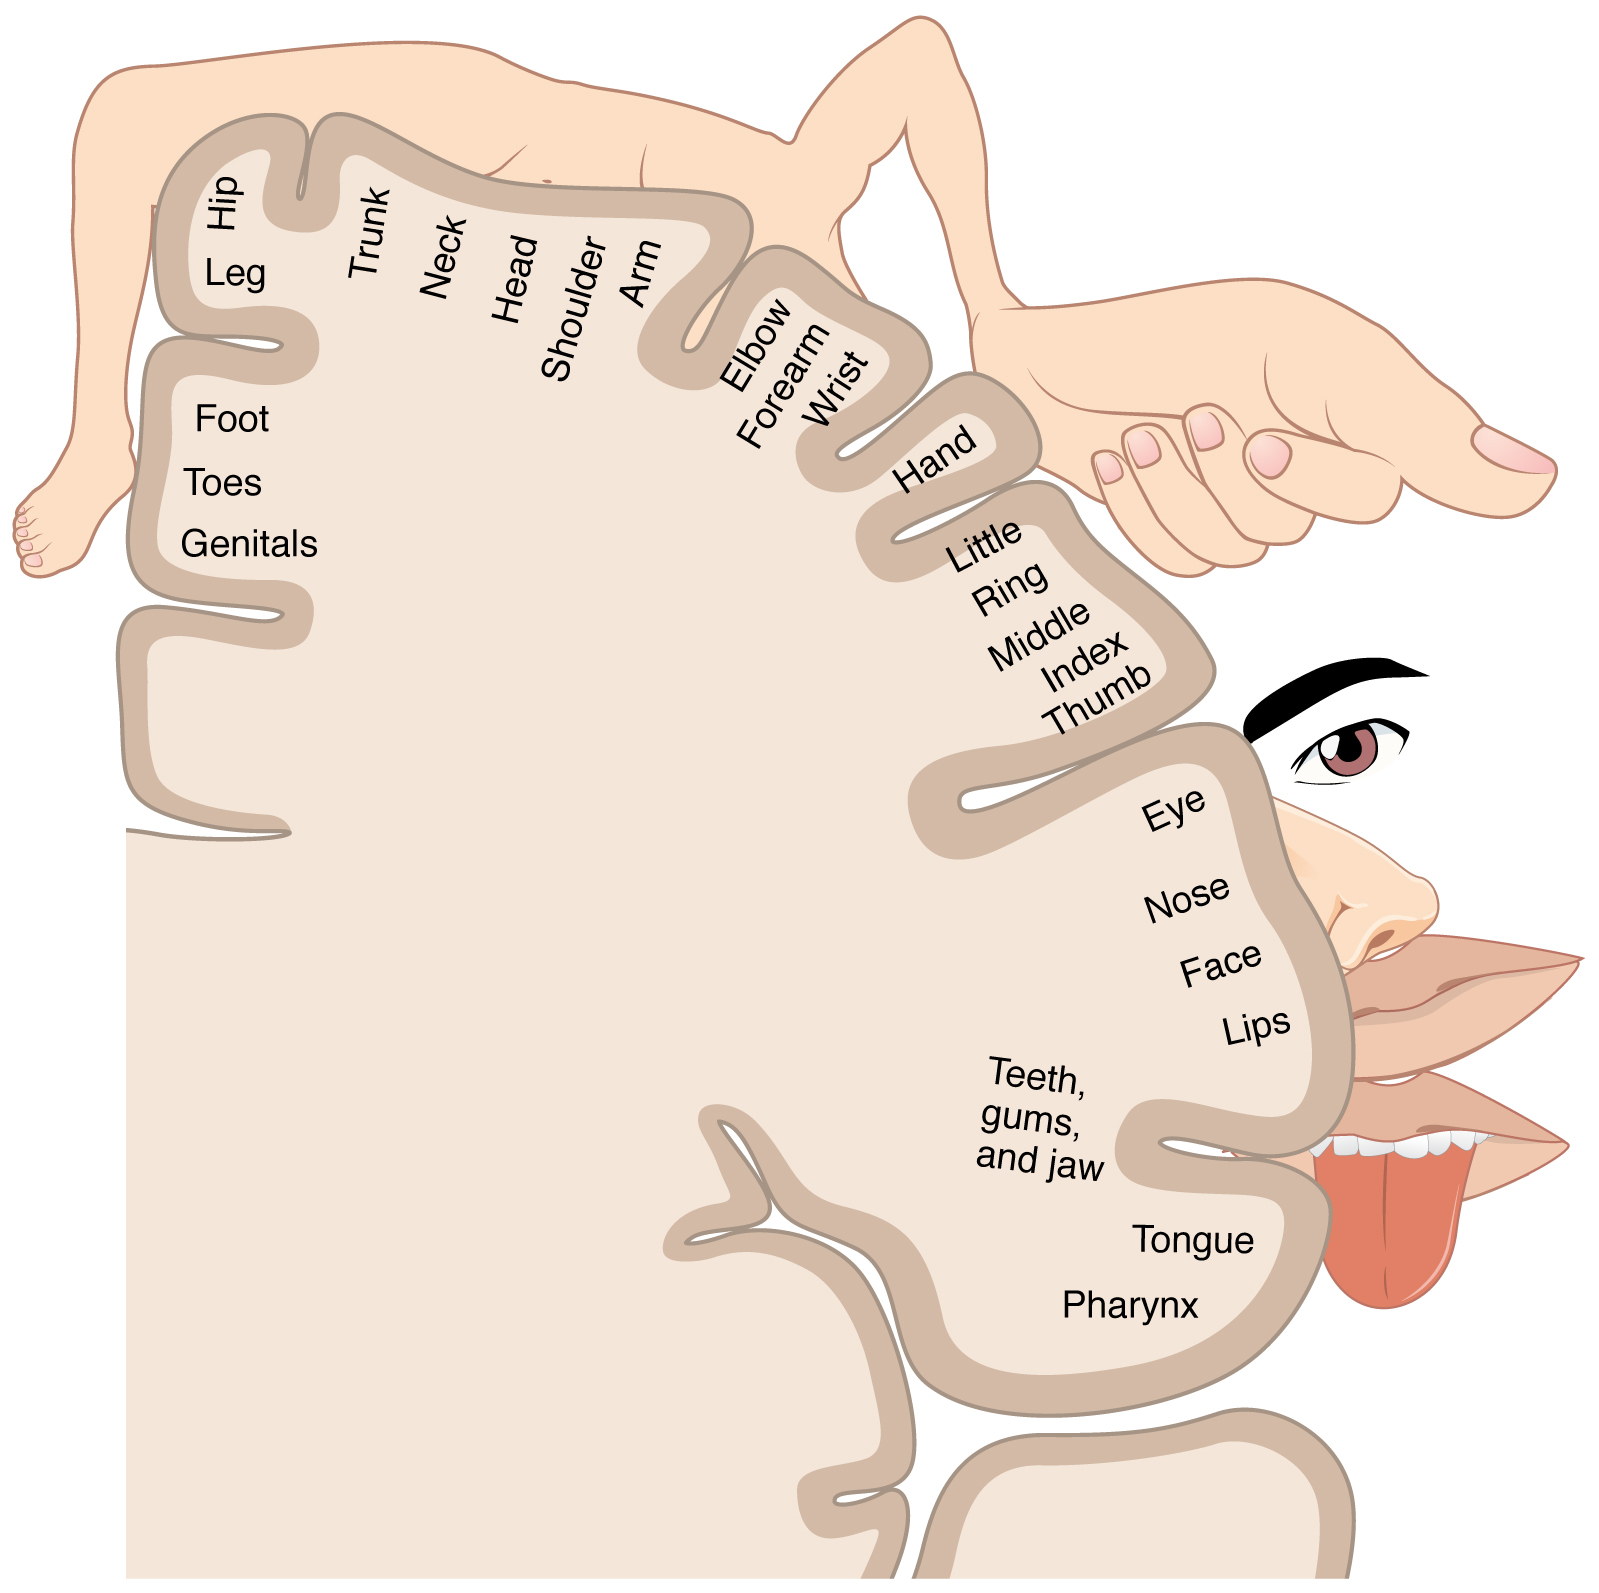 Our body map is presented in the main somatosensory cortex of the brain, and the nervous system will recognize our body parts based on it. Once the nerve impulses that innervate these areas are not properly processed, certain parts of the body will disappear from the somatotopic map of the brain.